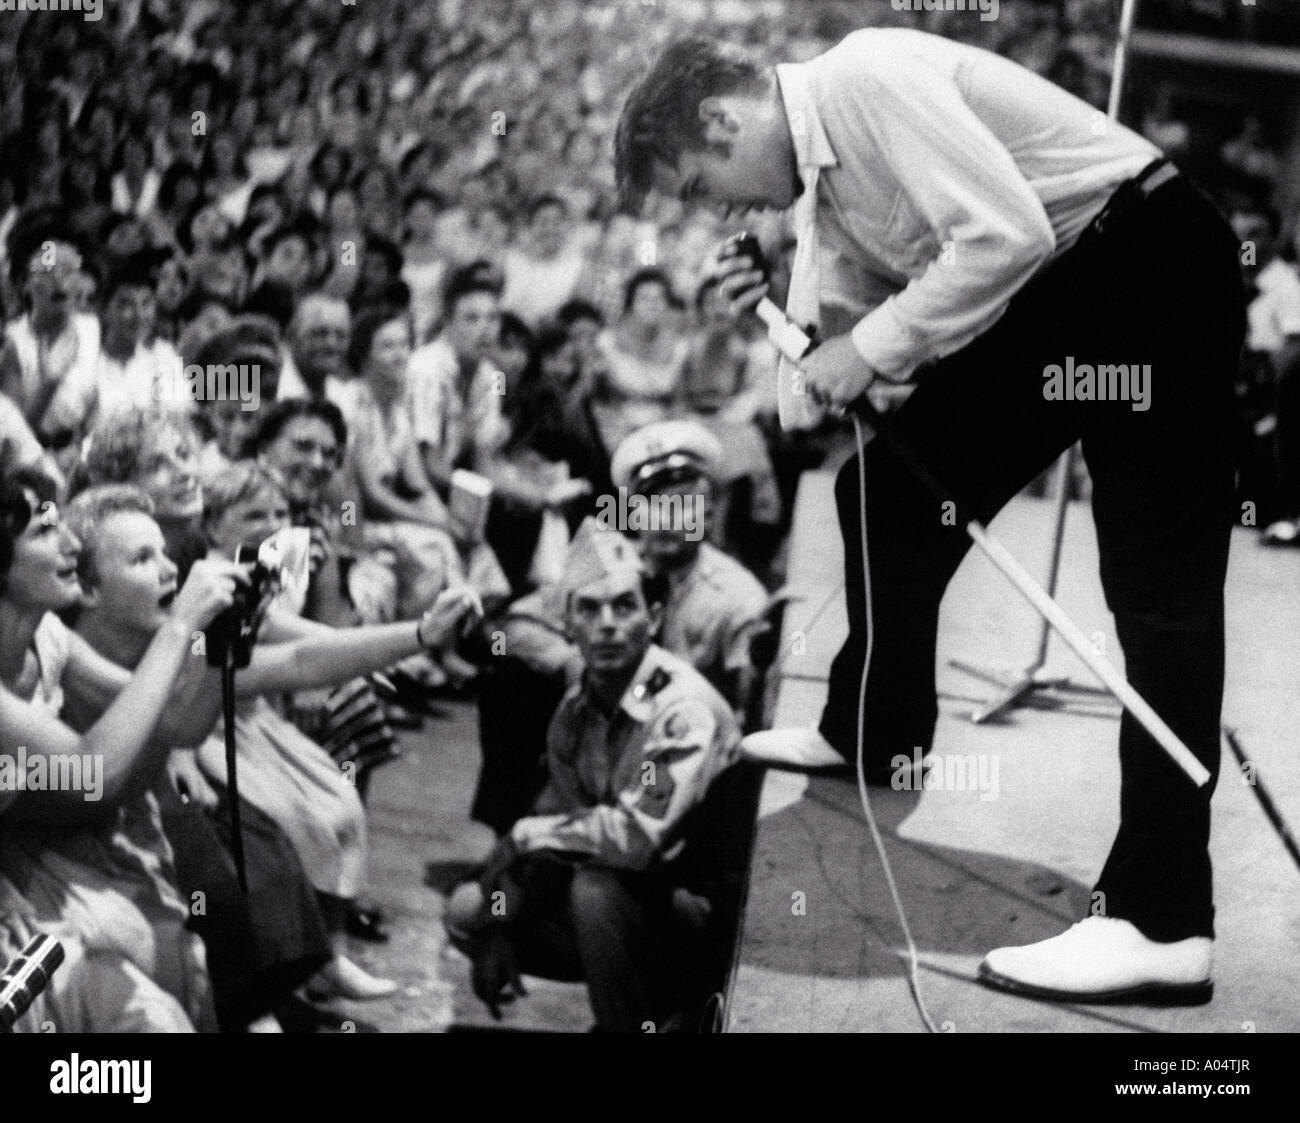 Elvis Presley Fans High Resolution Stock Photography and Images - Alamy